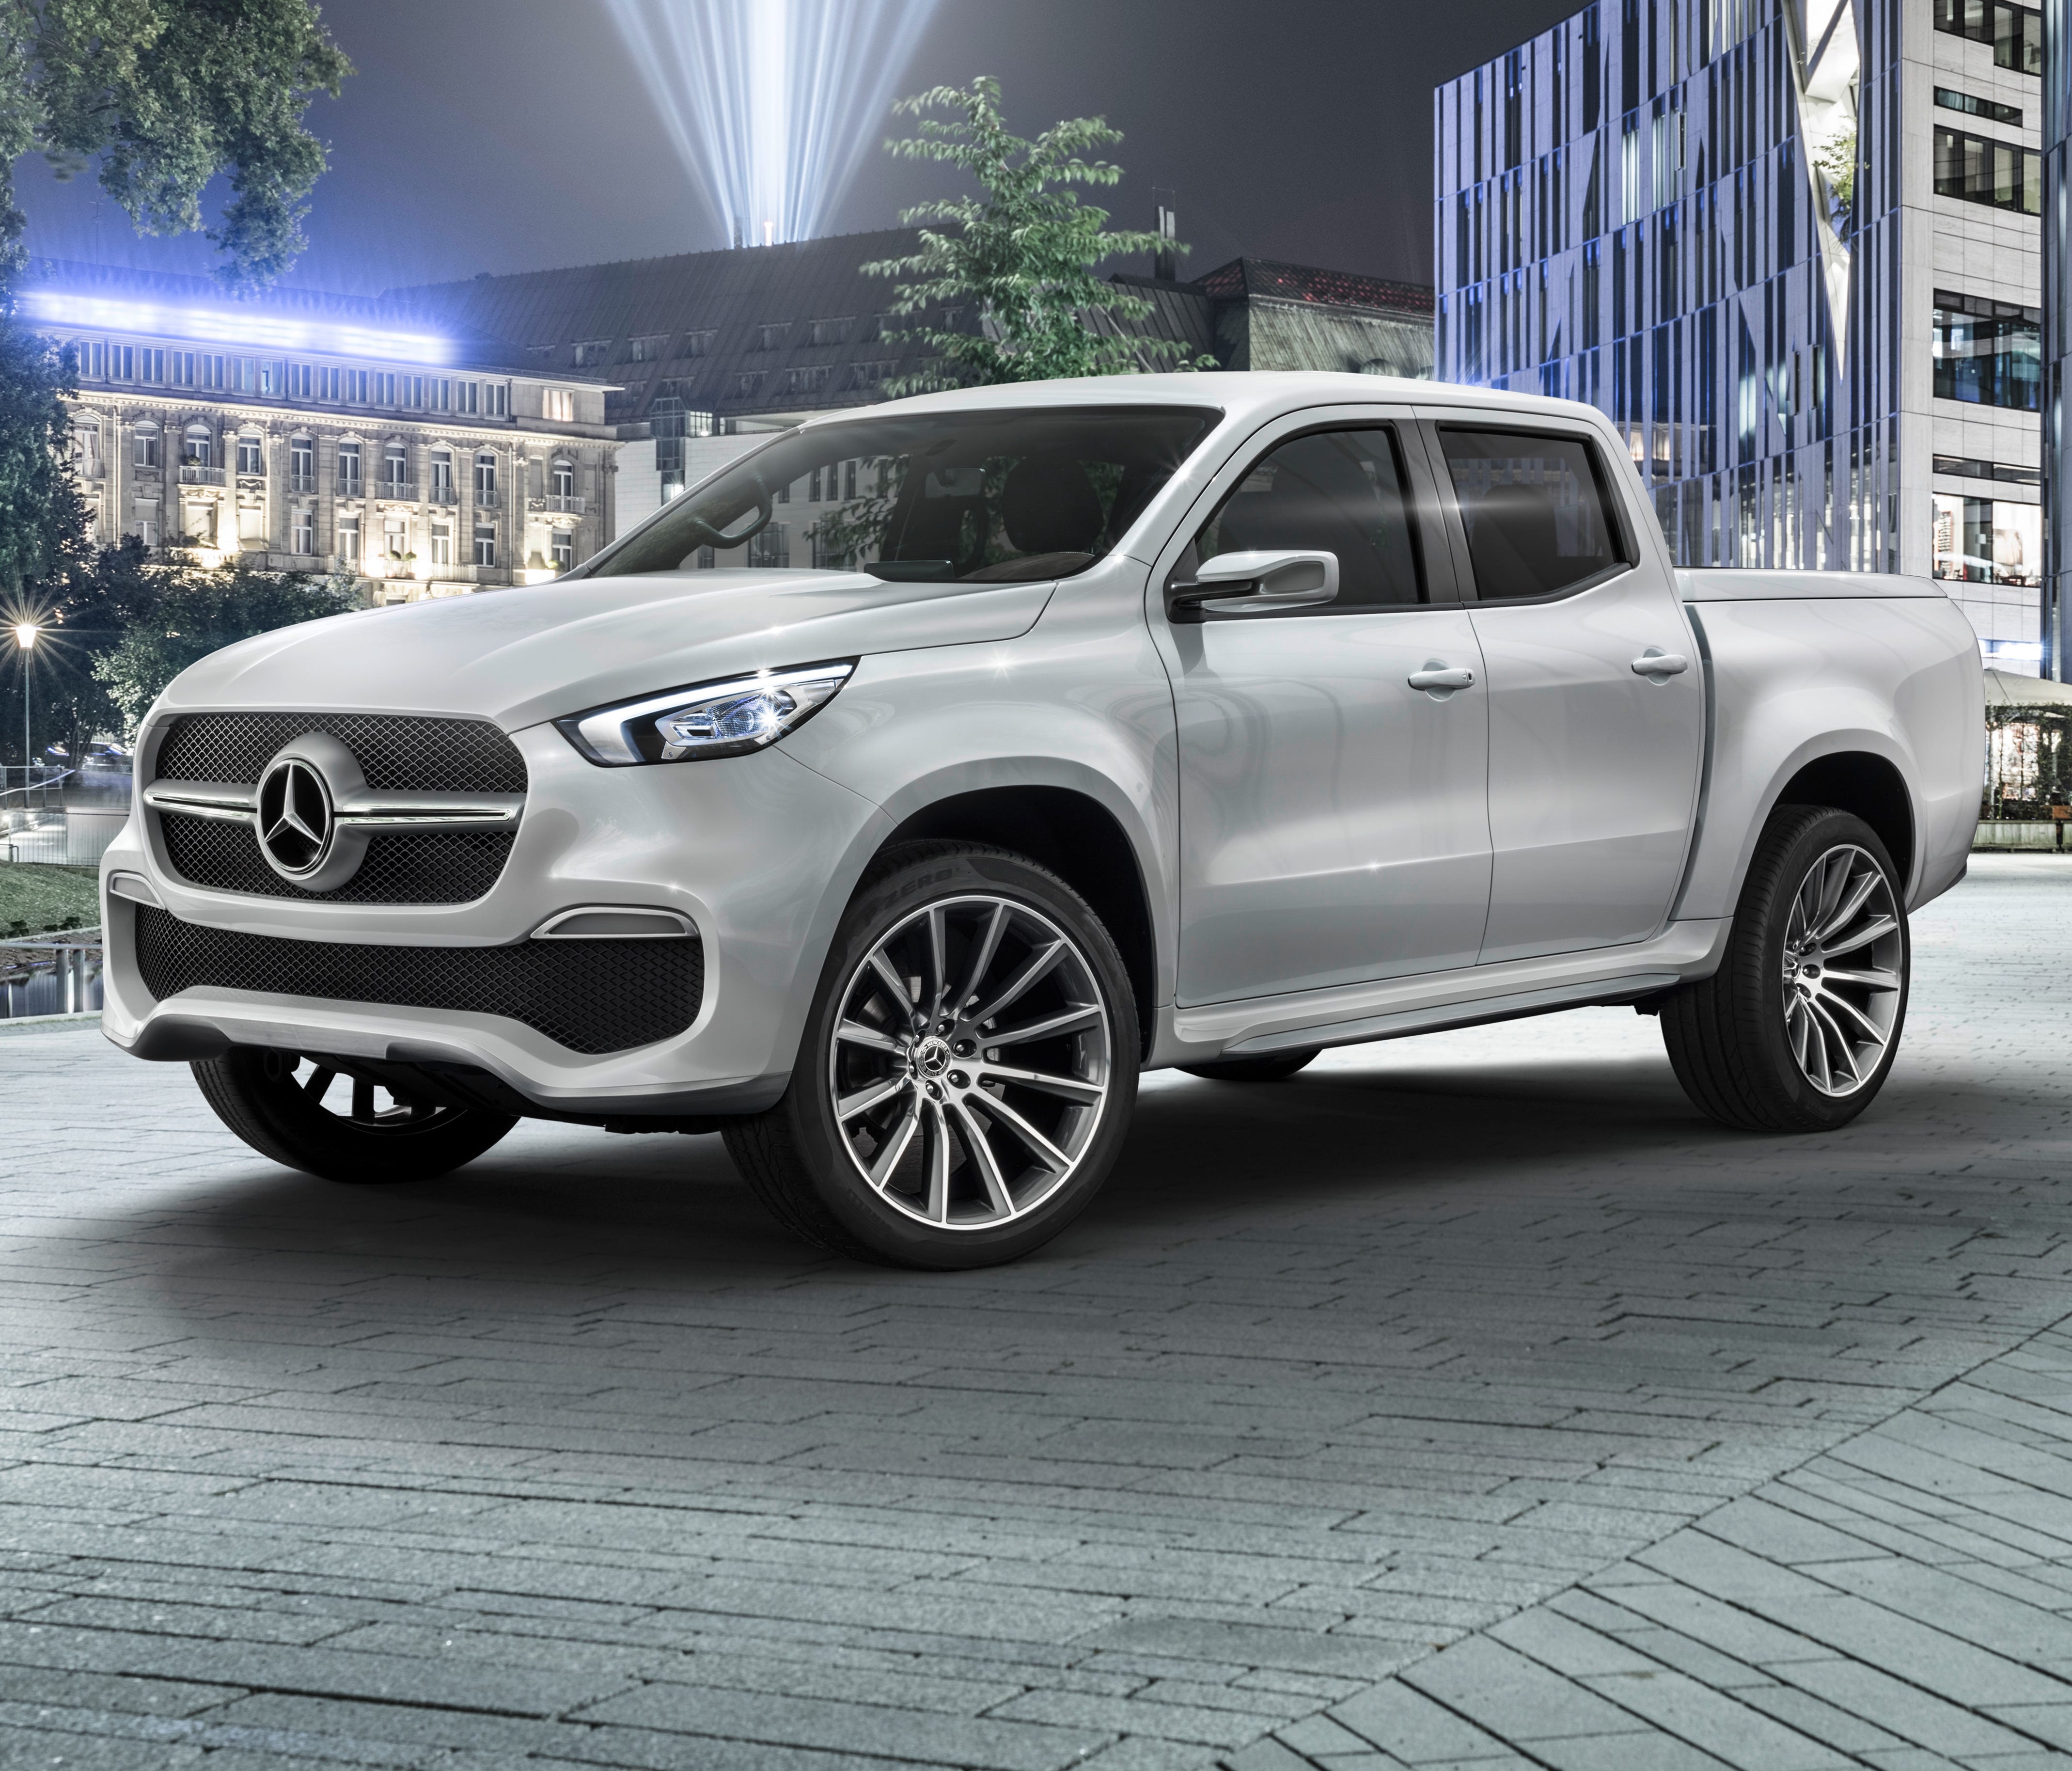 Mercedes-Benz show its concept for a pickup, the Concept X-Class